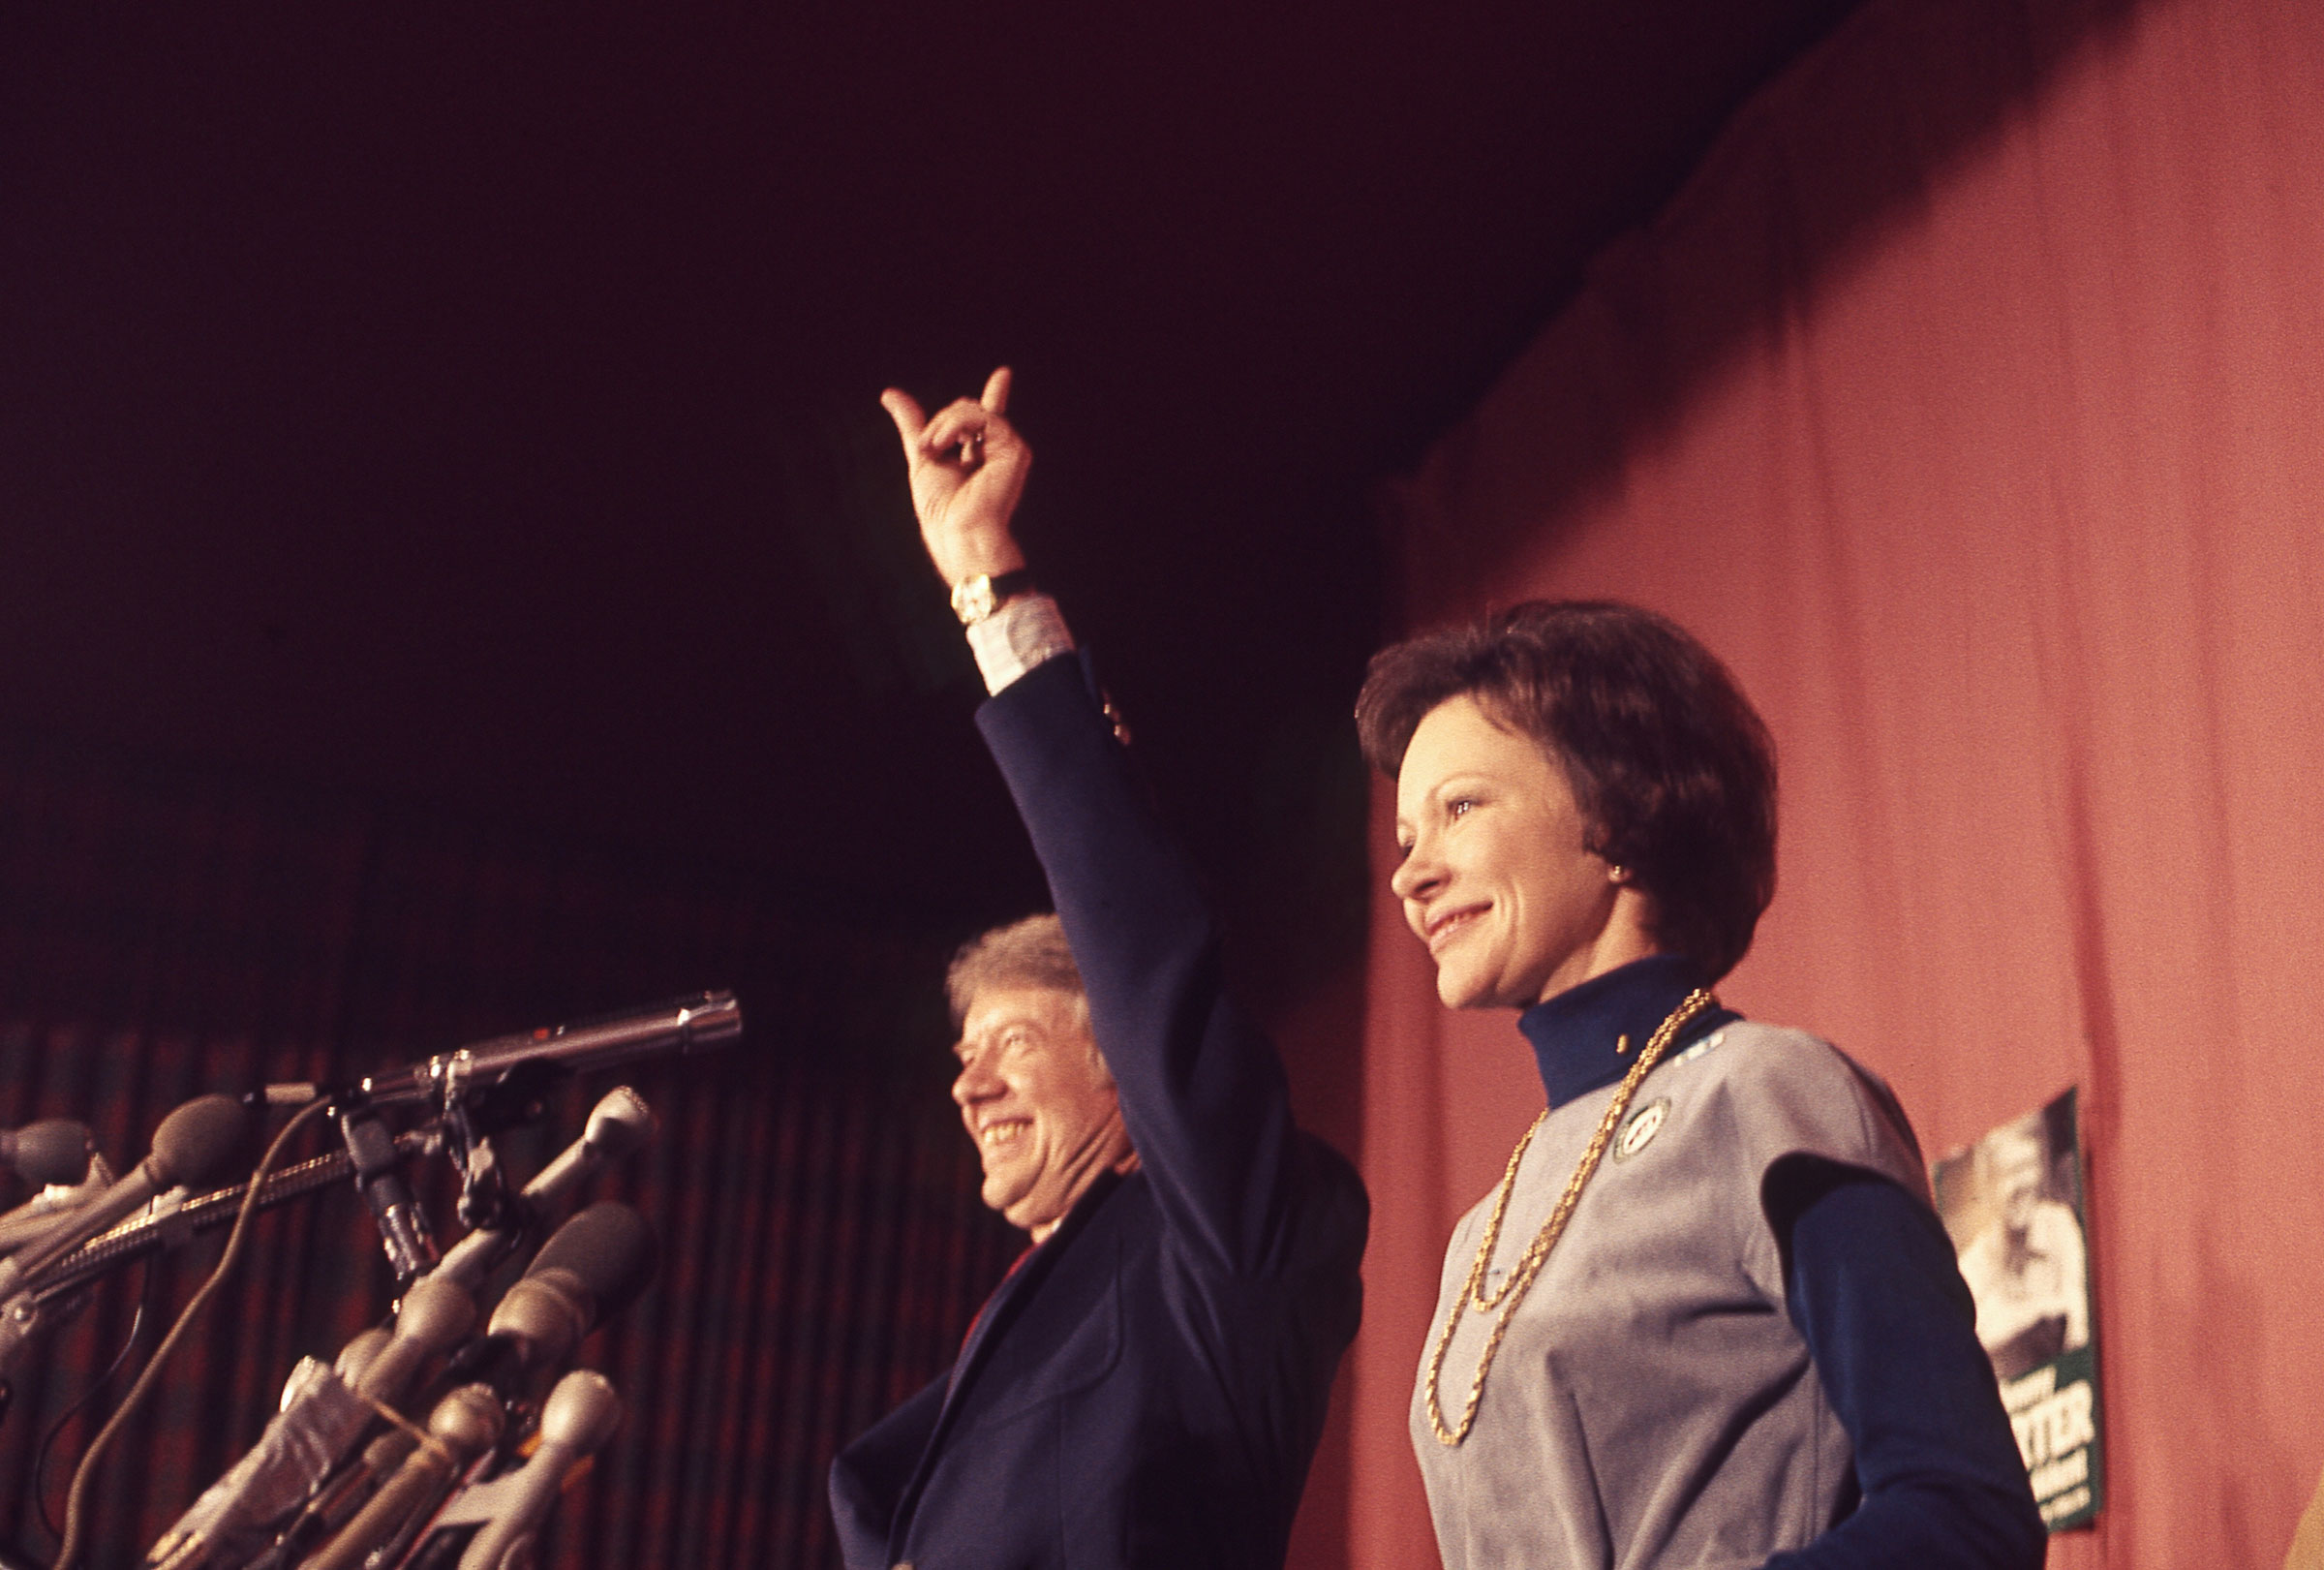 Then presidential candidate Jimmy Carter and his wife, Rosalynn Carter, celebrate victory in the New Hampshire Democratic Primary election, on Feb. 24, 1976. (Mikki Ansin—Getty Images)